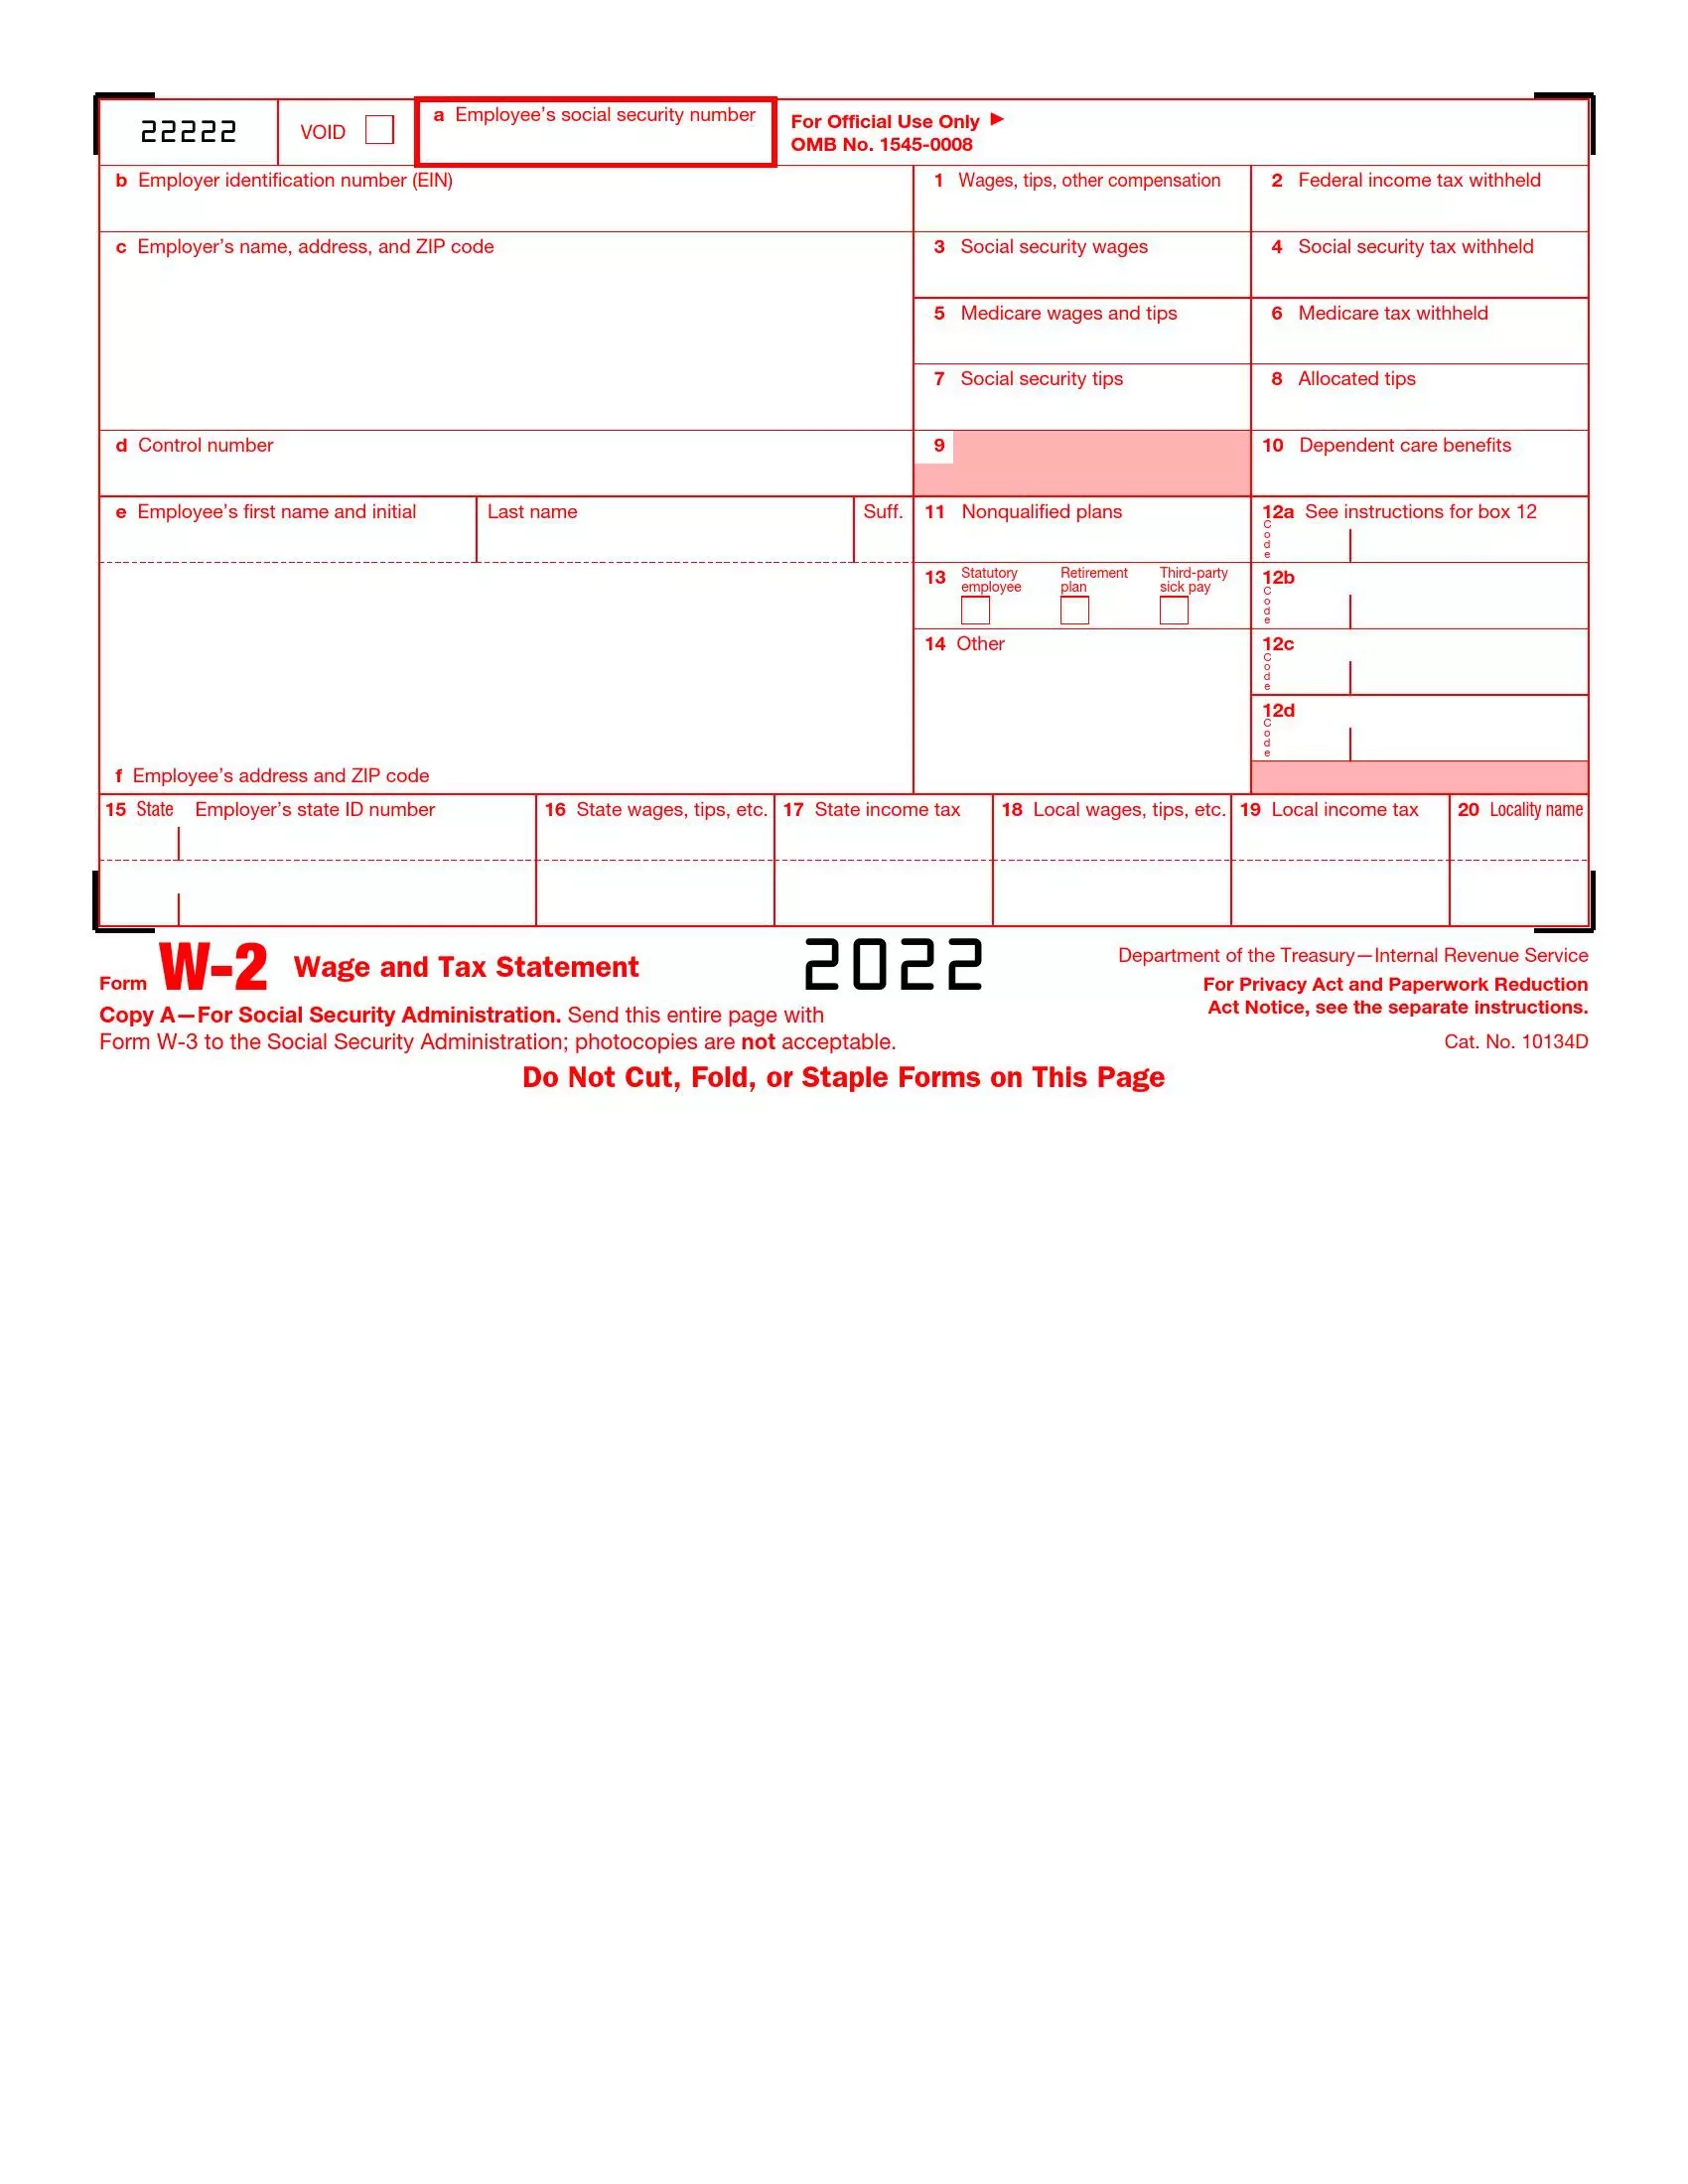 Irs Form W-2 ≡ Fill Out Printable Pdf Forms Online pertaining to Download W2 Form